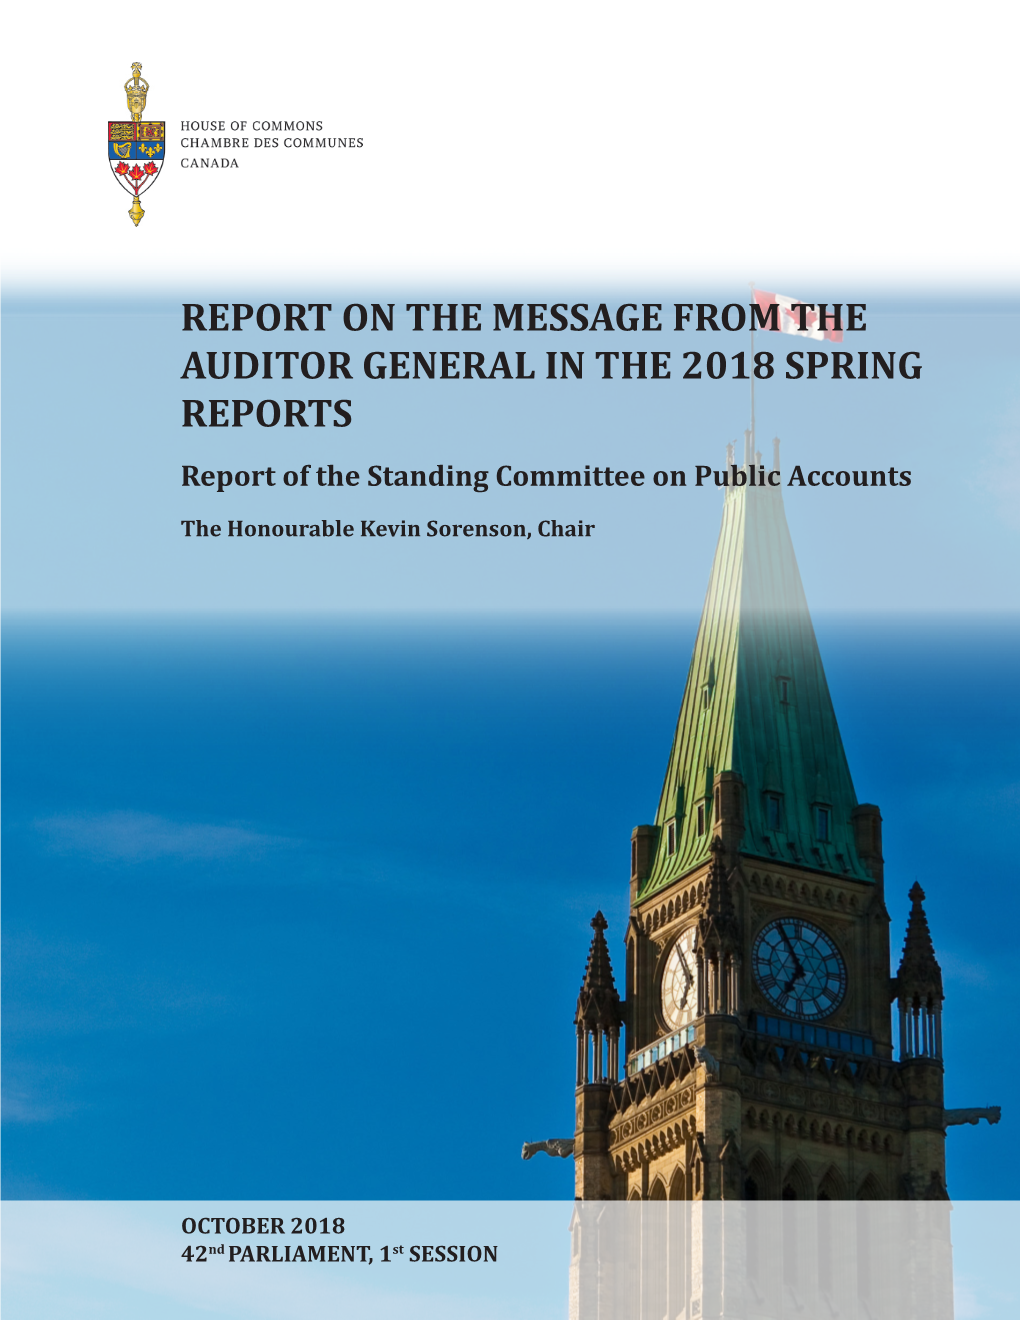 Message of the Auditor General in the 2018 Spring Reports, and Has Agreed to Report the Following